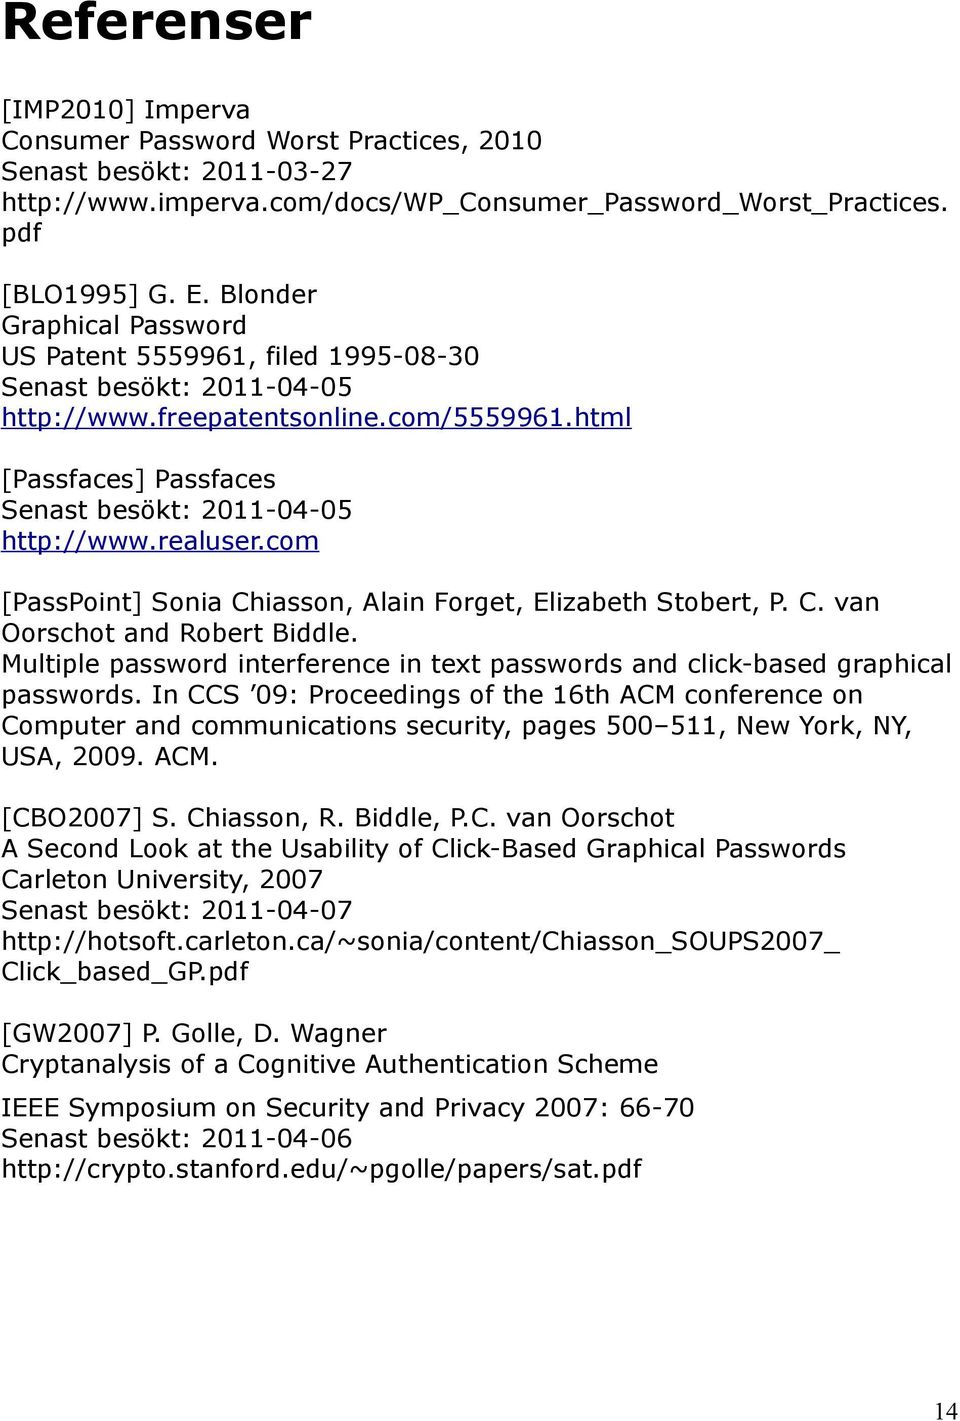 realuser.com [PassPoint] Sonia Chiasson, Alain Forget, Elizabeth Stobert, P. C. van Oorschot and Robert Biddle. Multiple password interference in text passwords and click-based graphical passwords.